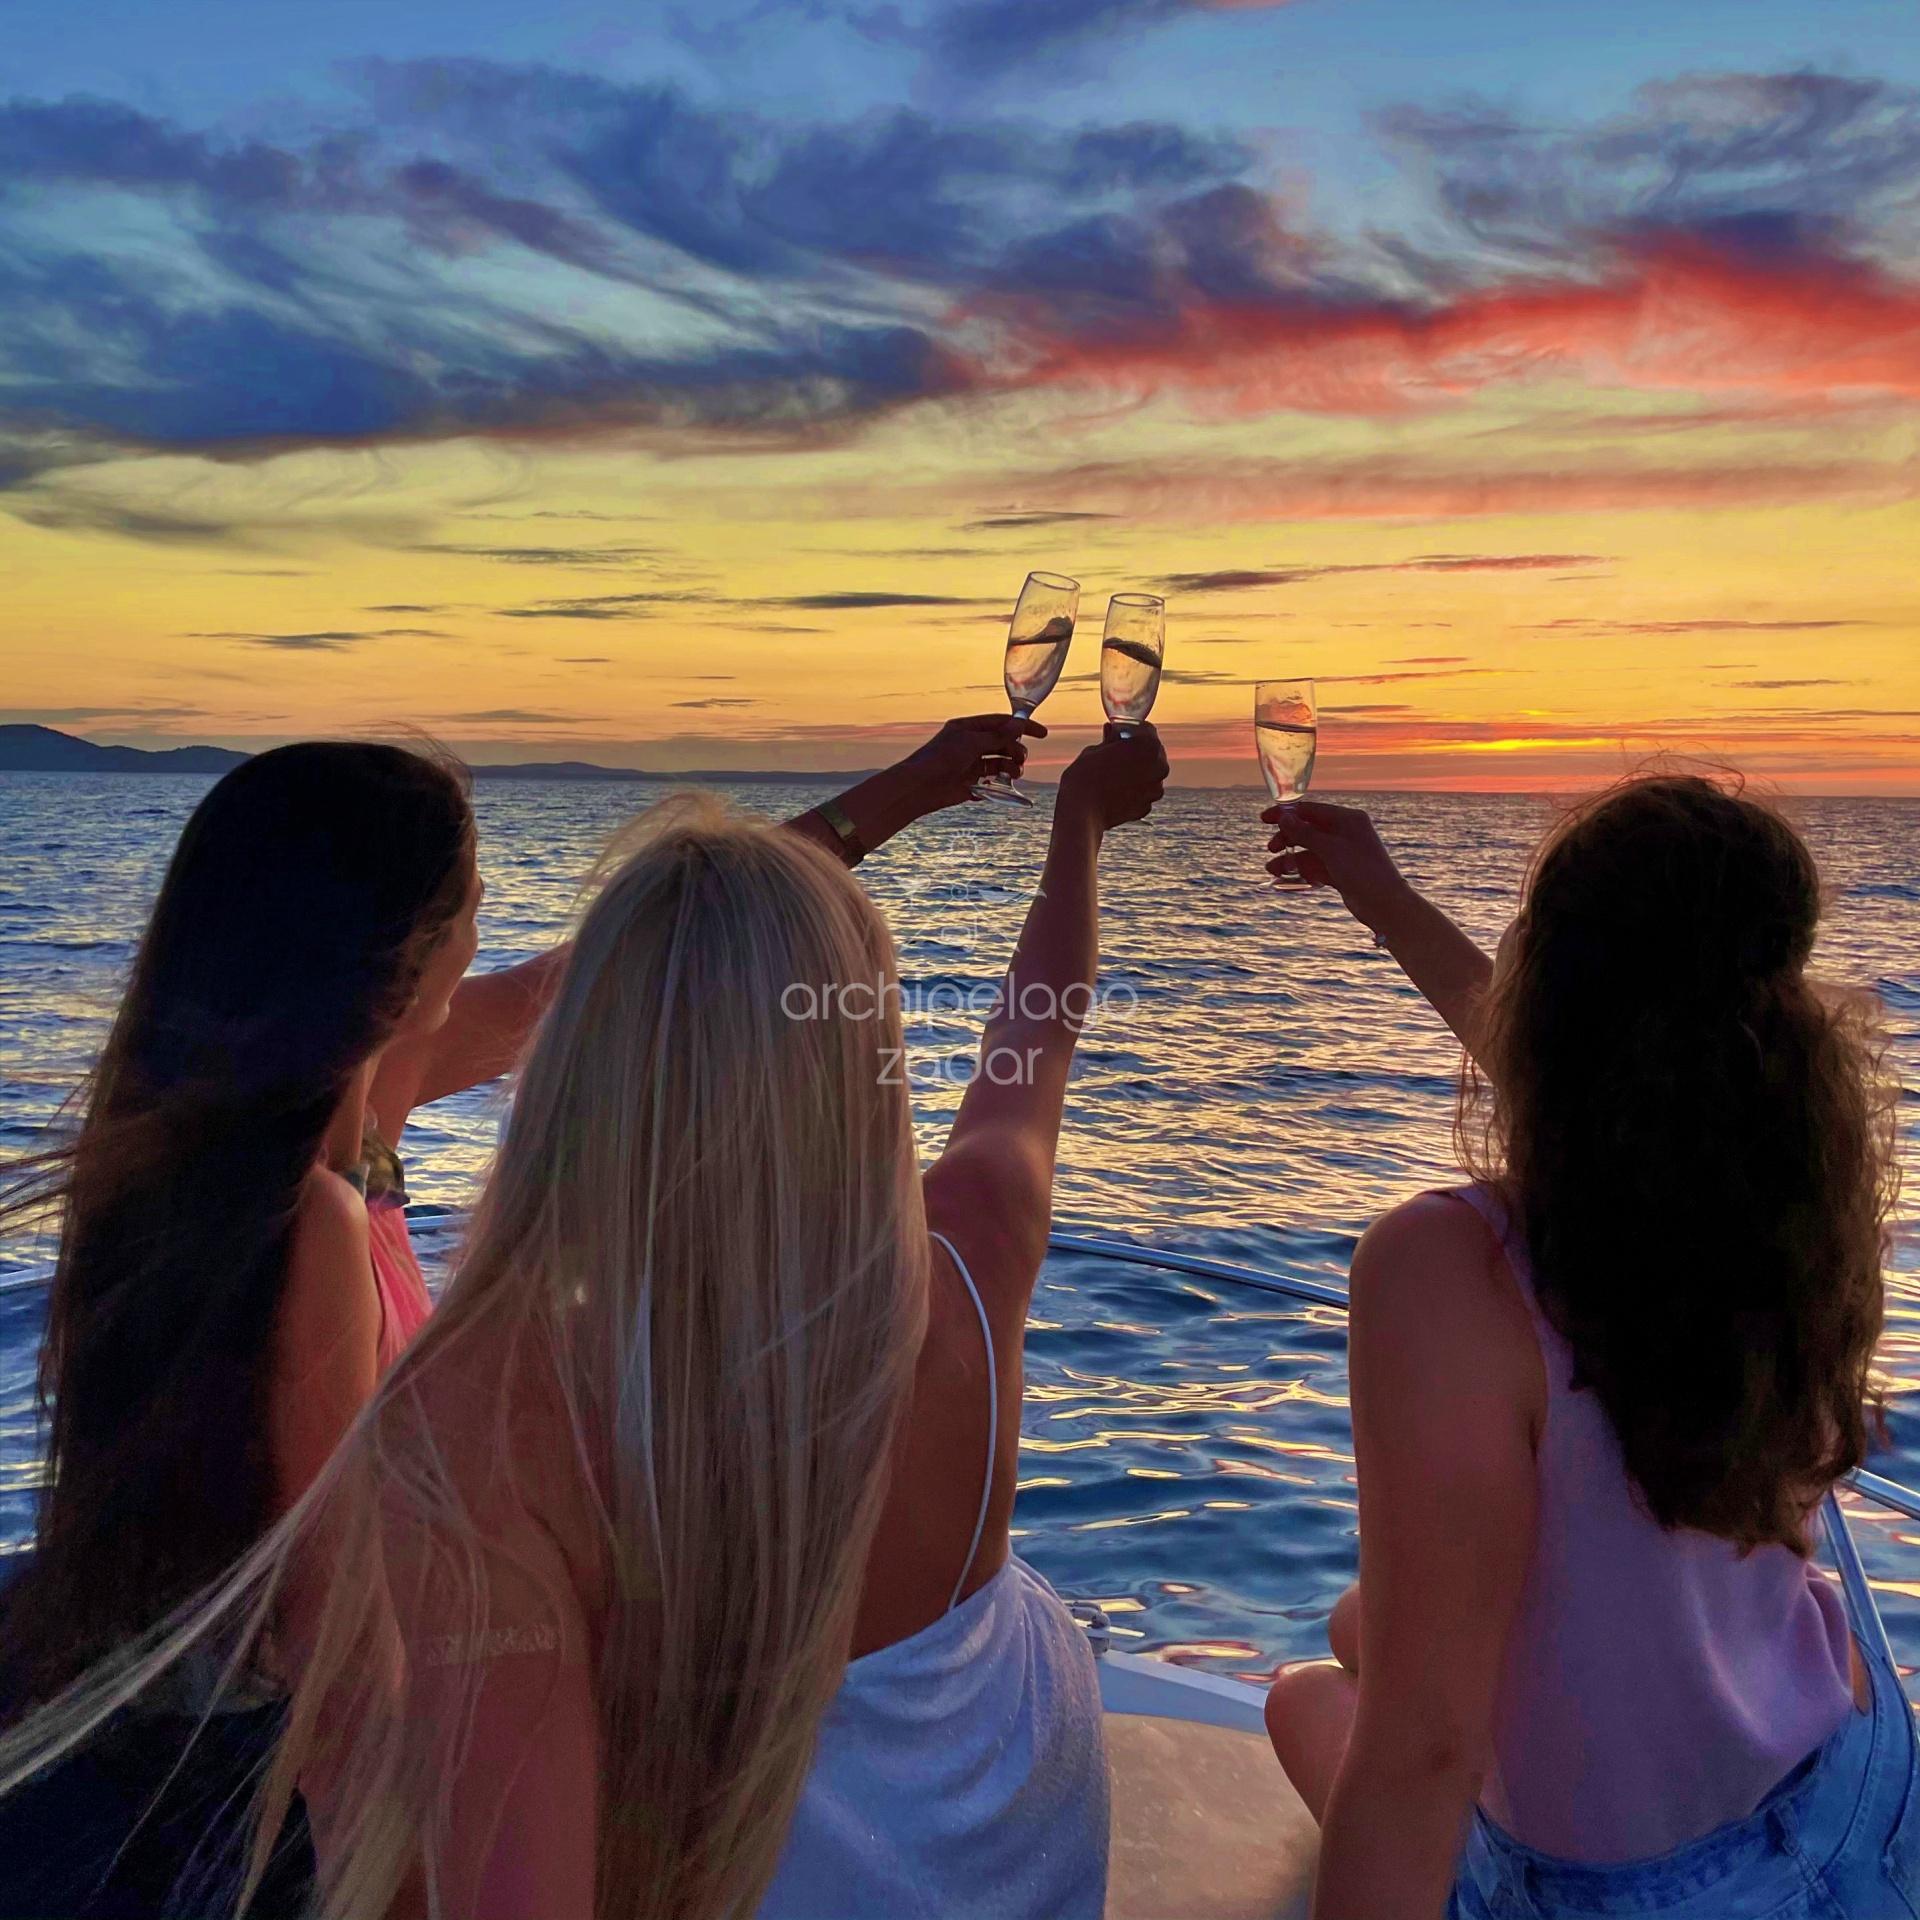 girls toasting on a bnoat in sunset